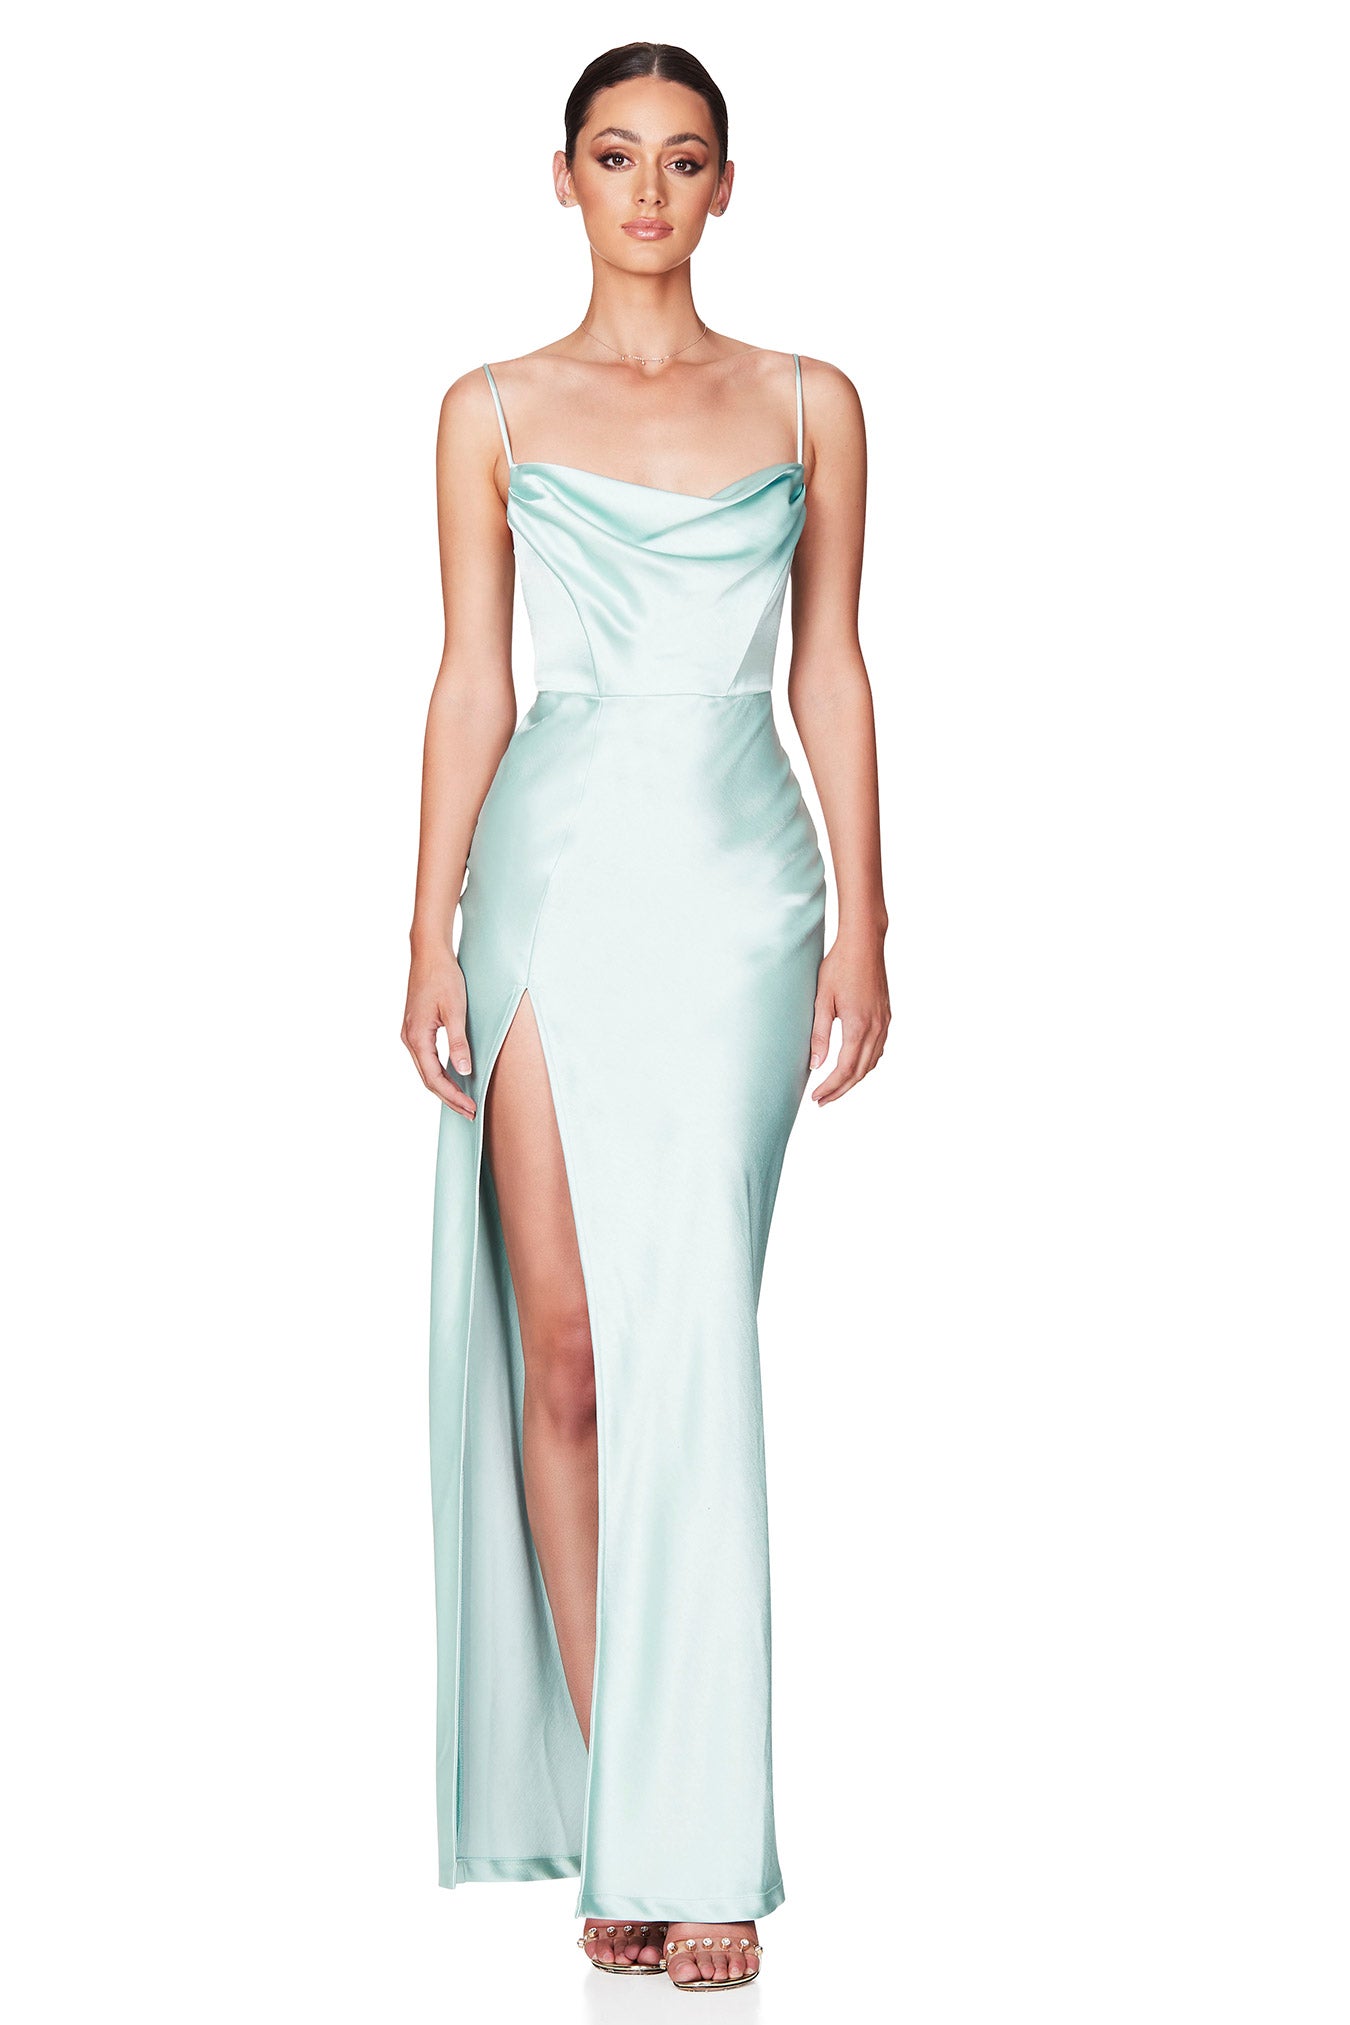 Dream Draped Gown in Mint by Nookie